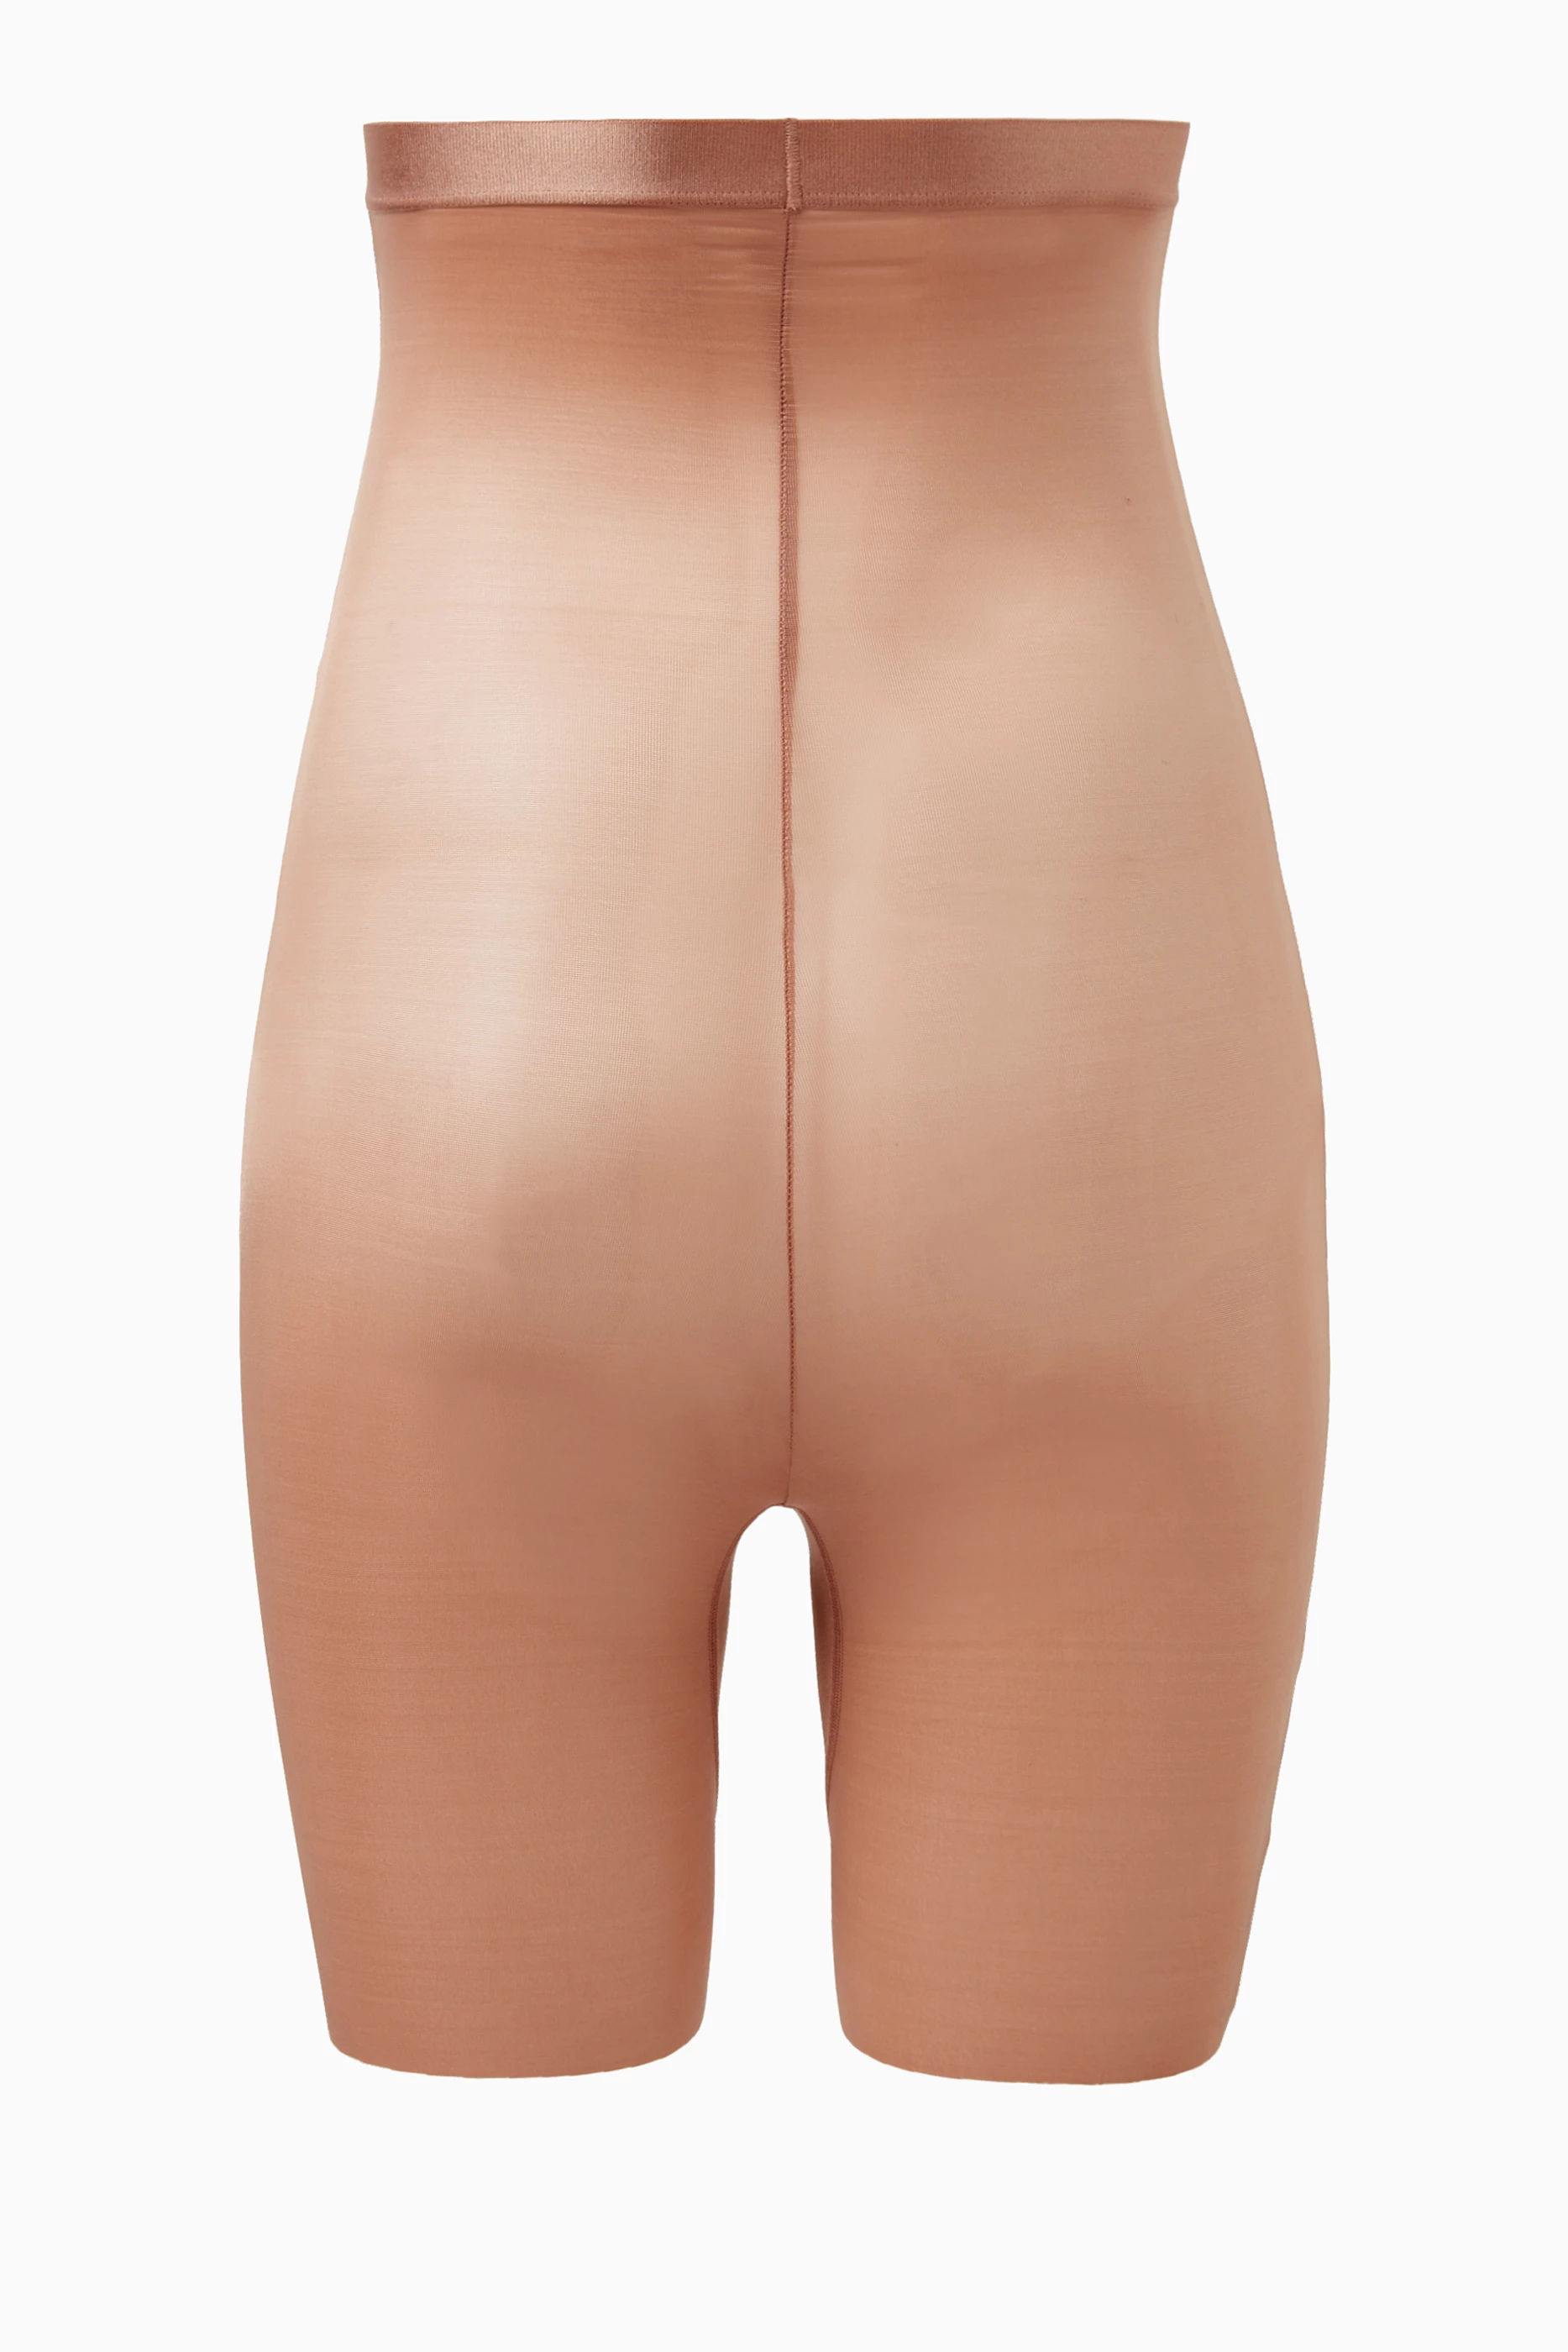 Buy SKIMS Brown Barely There Mid-thigh Shorts for Women in Qatar